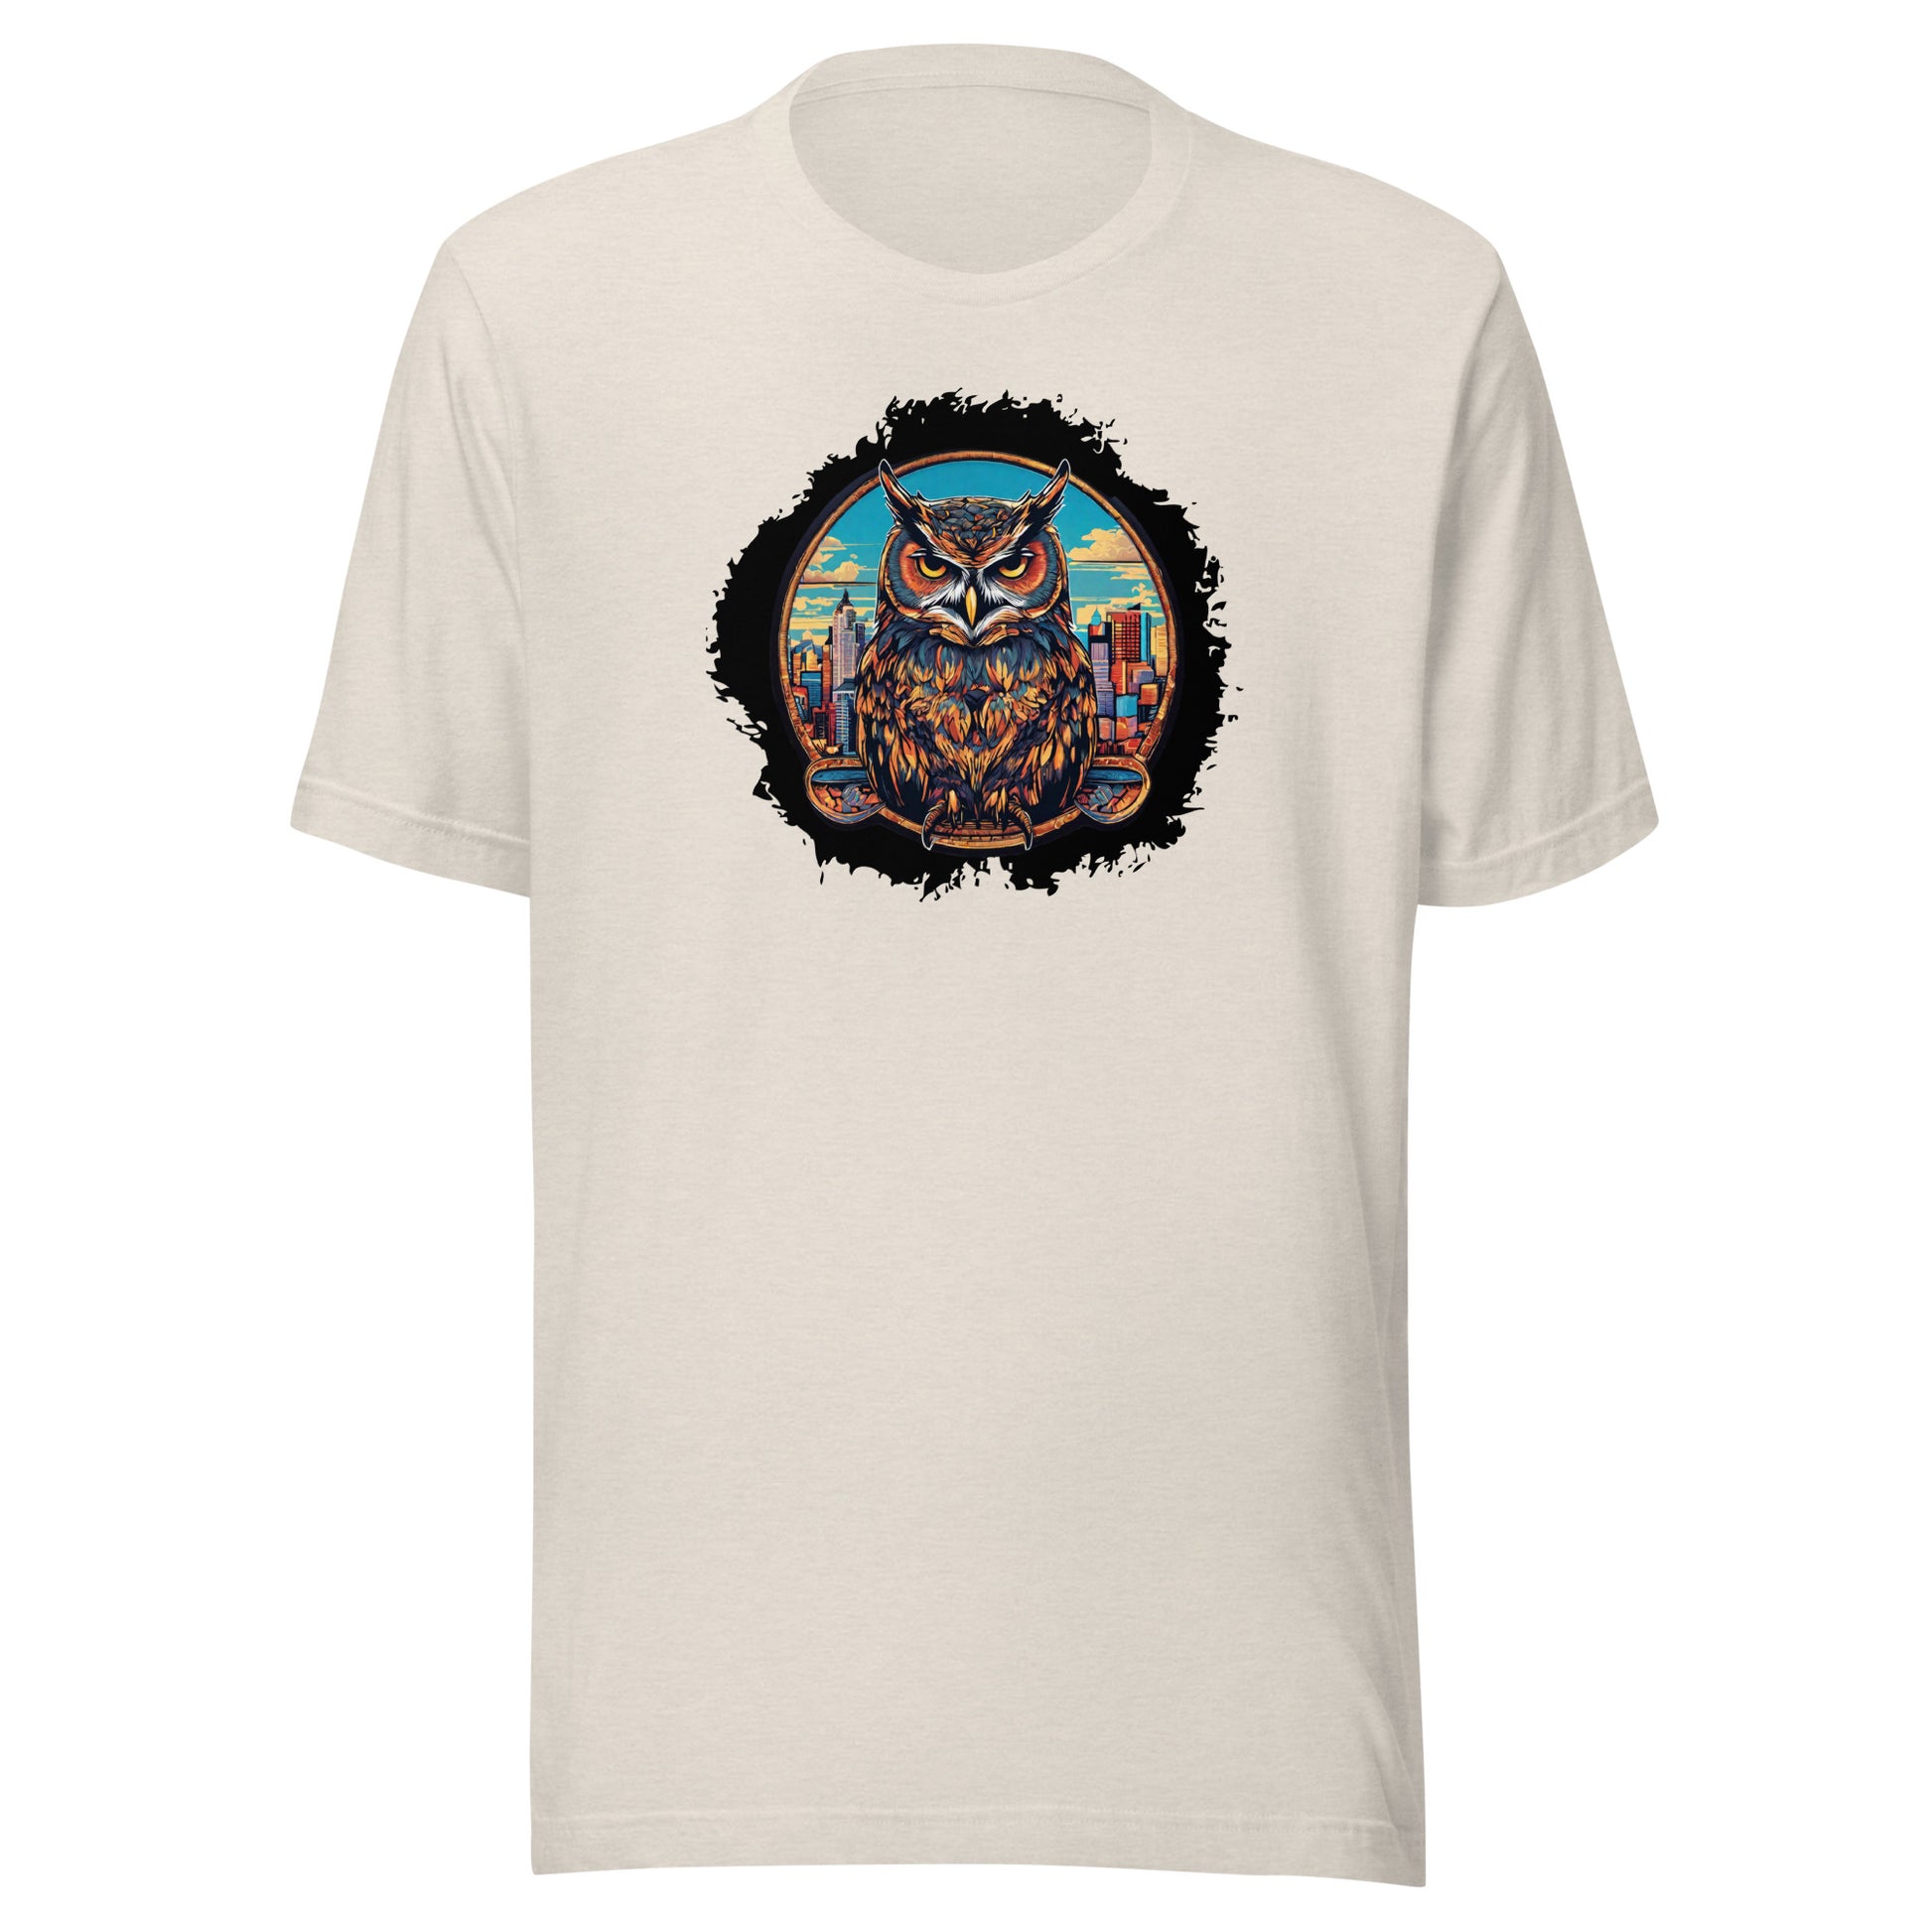 Owl in the City Emblem T-Shirt Heather Dust